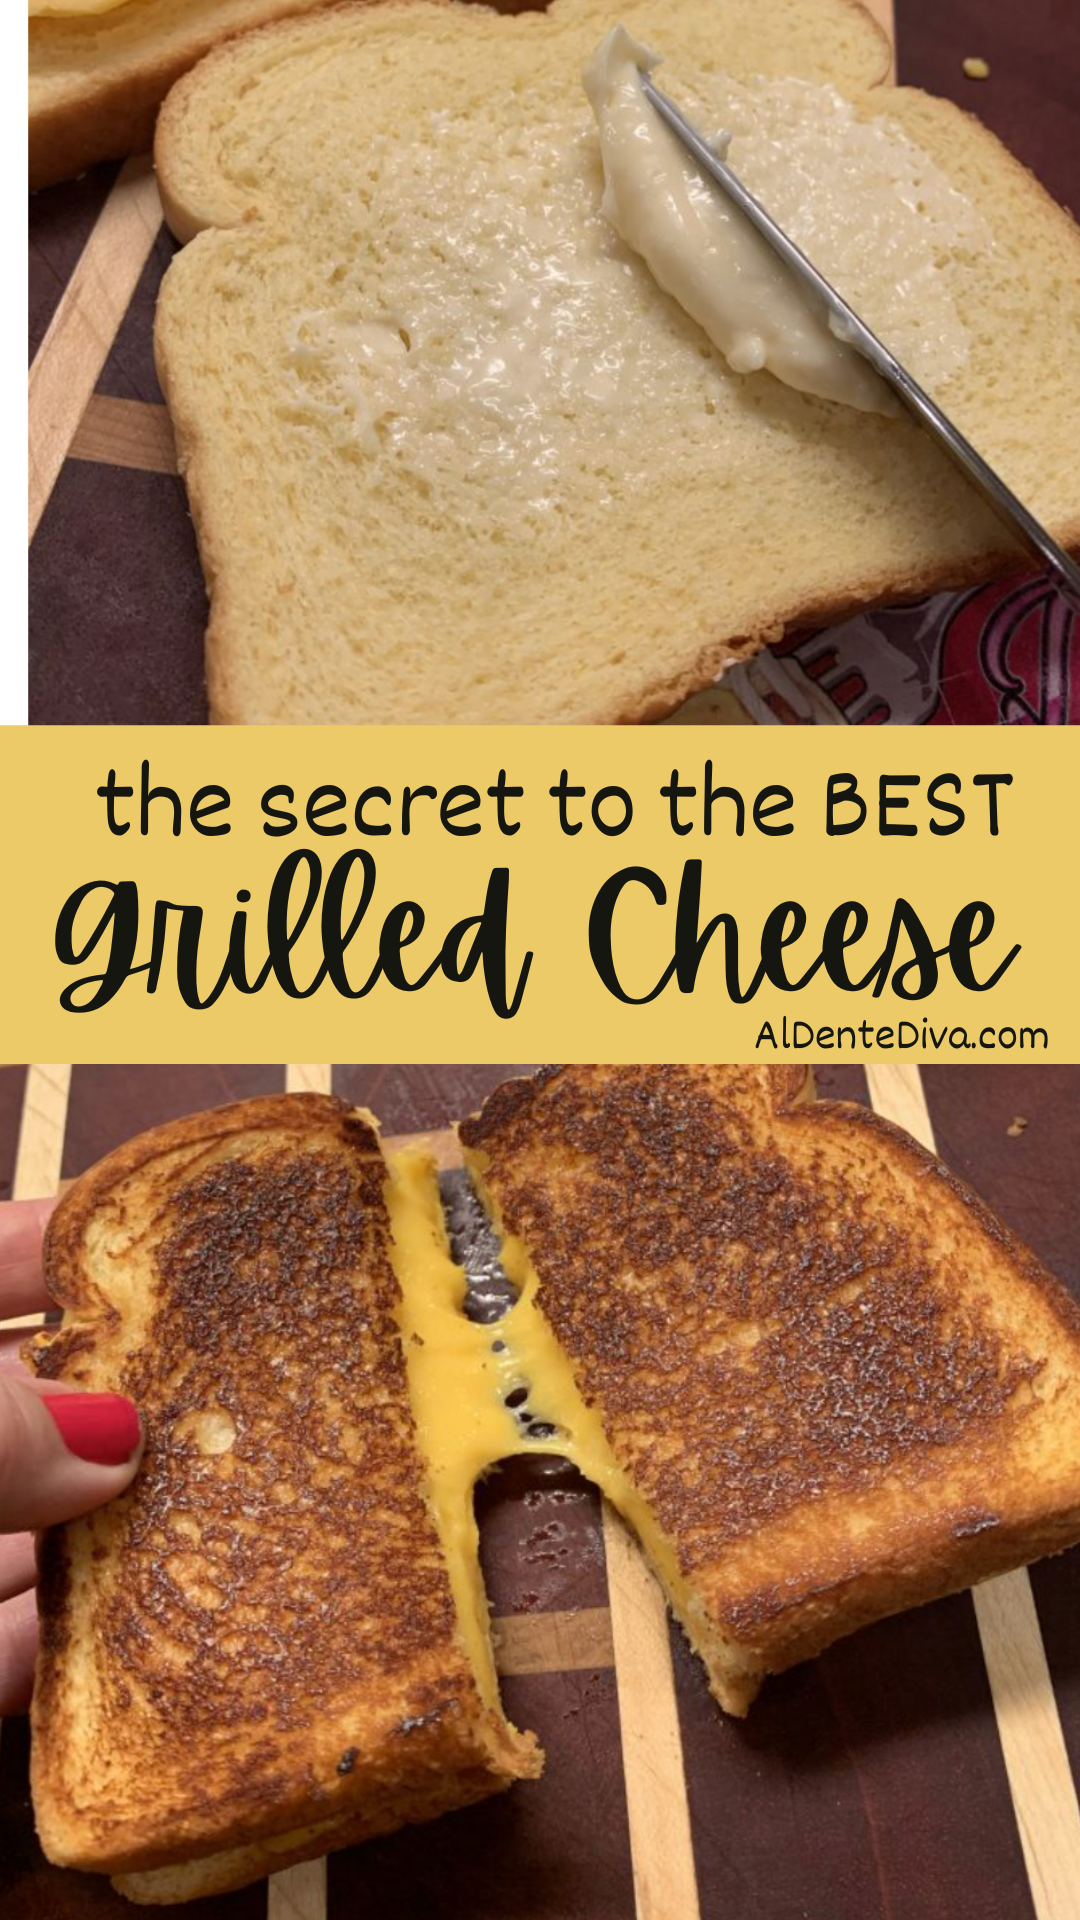 THE SECRET TO THE BEST GRILLED CHEESE